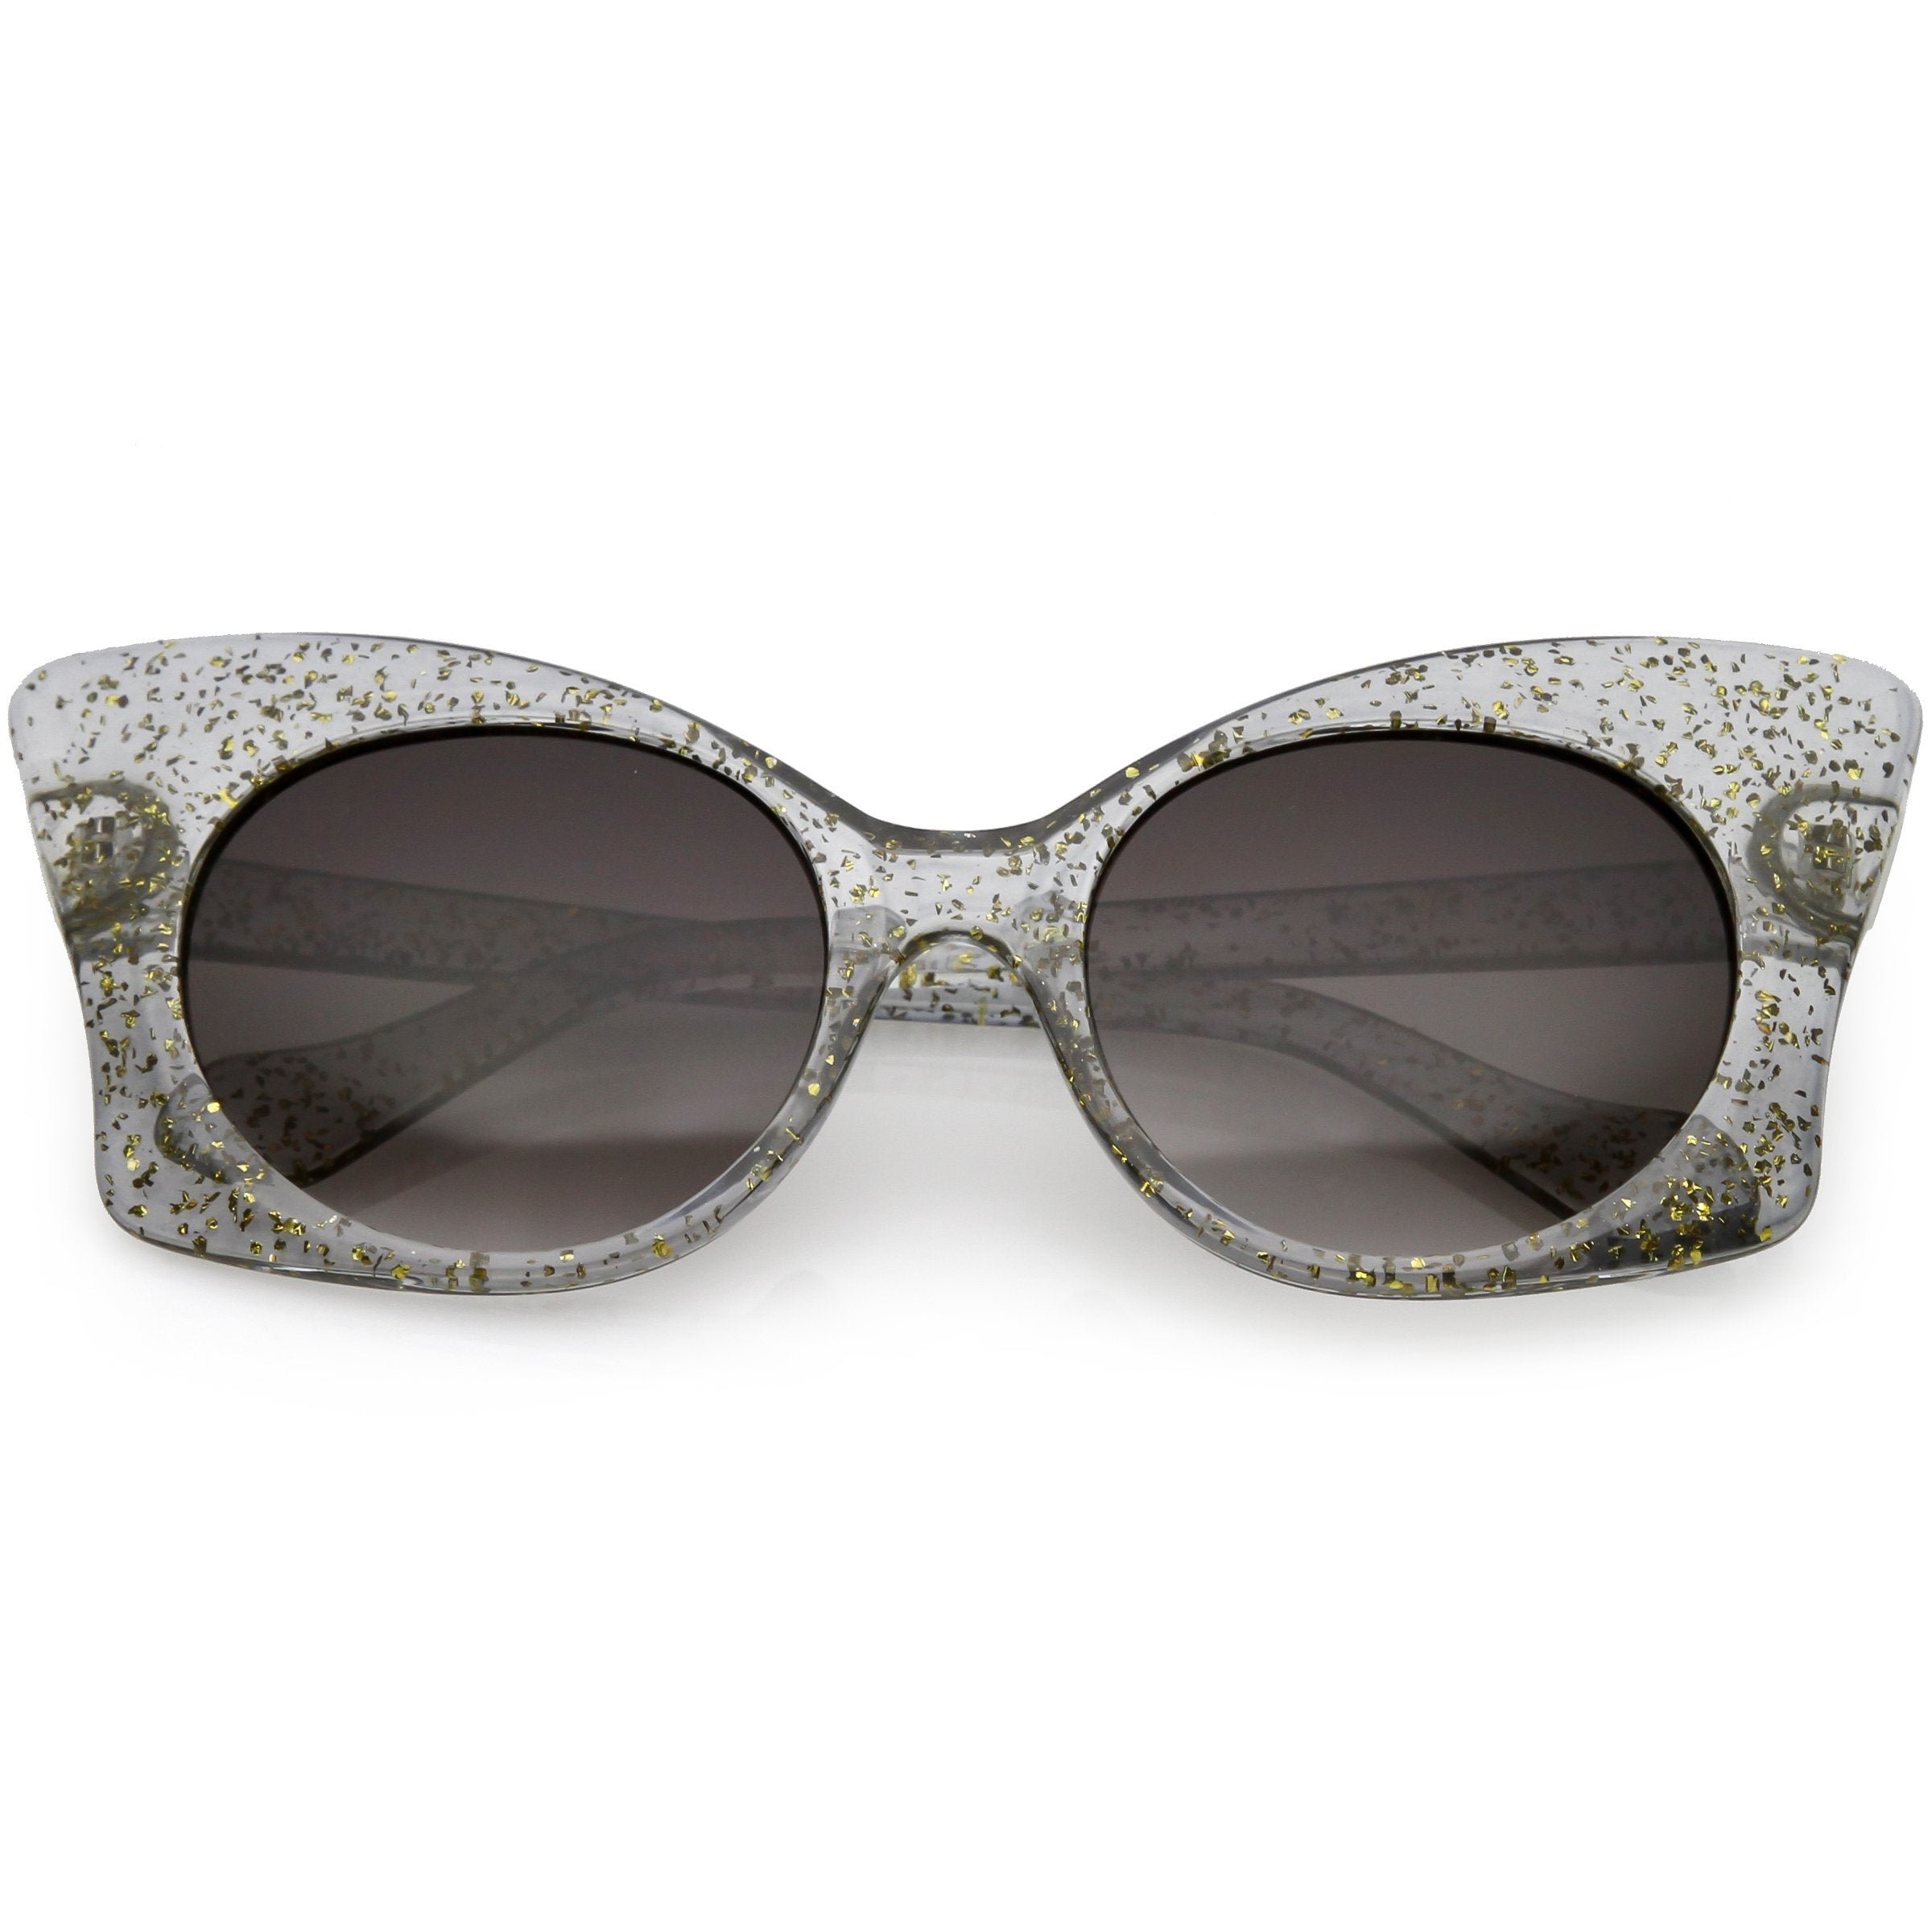 Alaia Women's Clear Contrasting Round Acetate Sunglasses